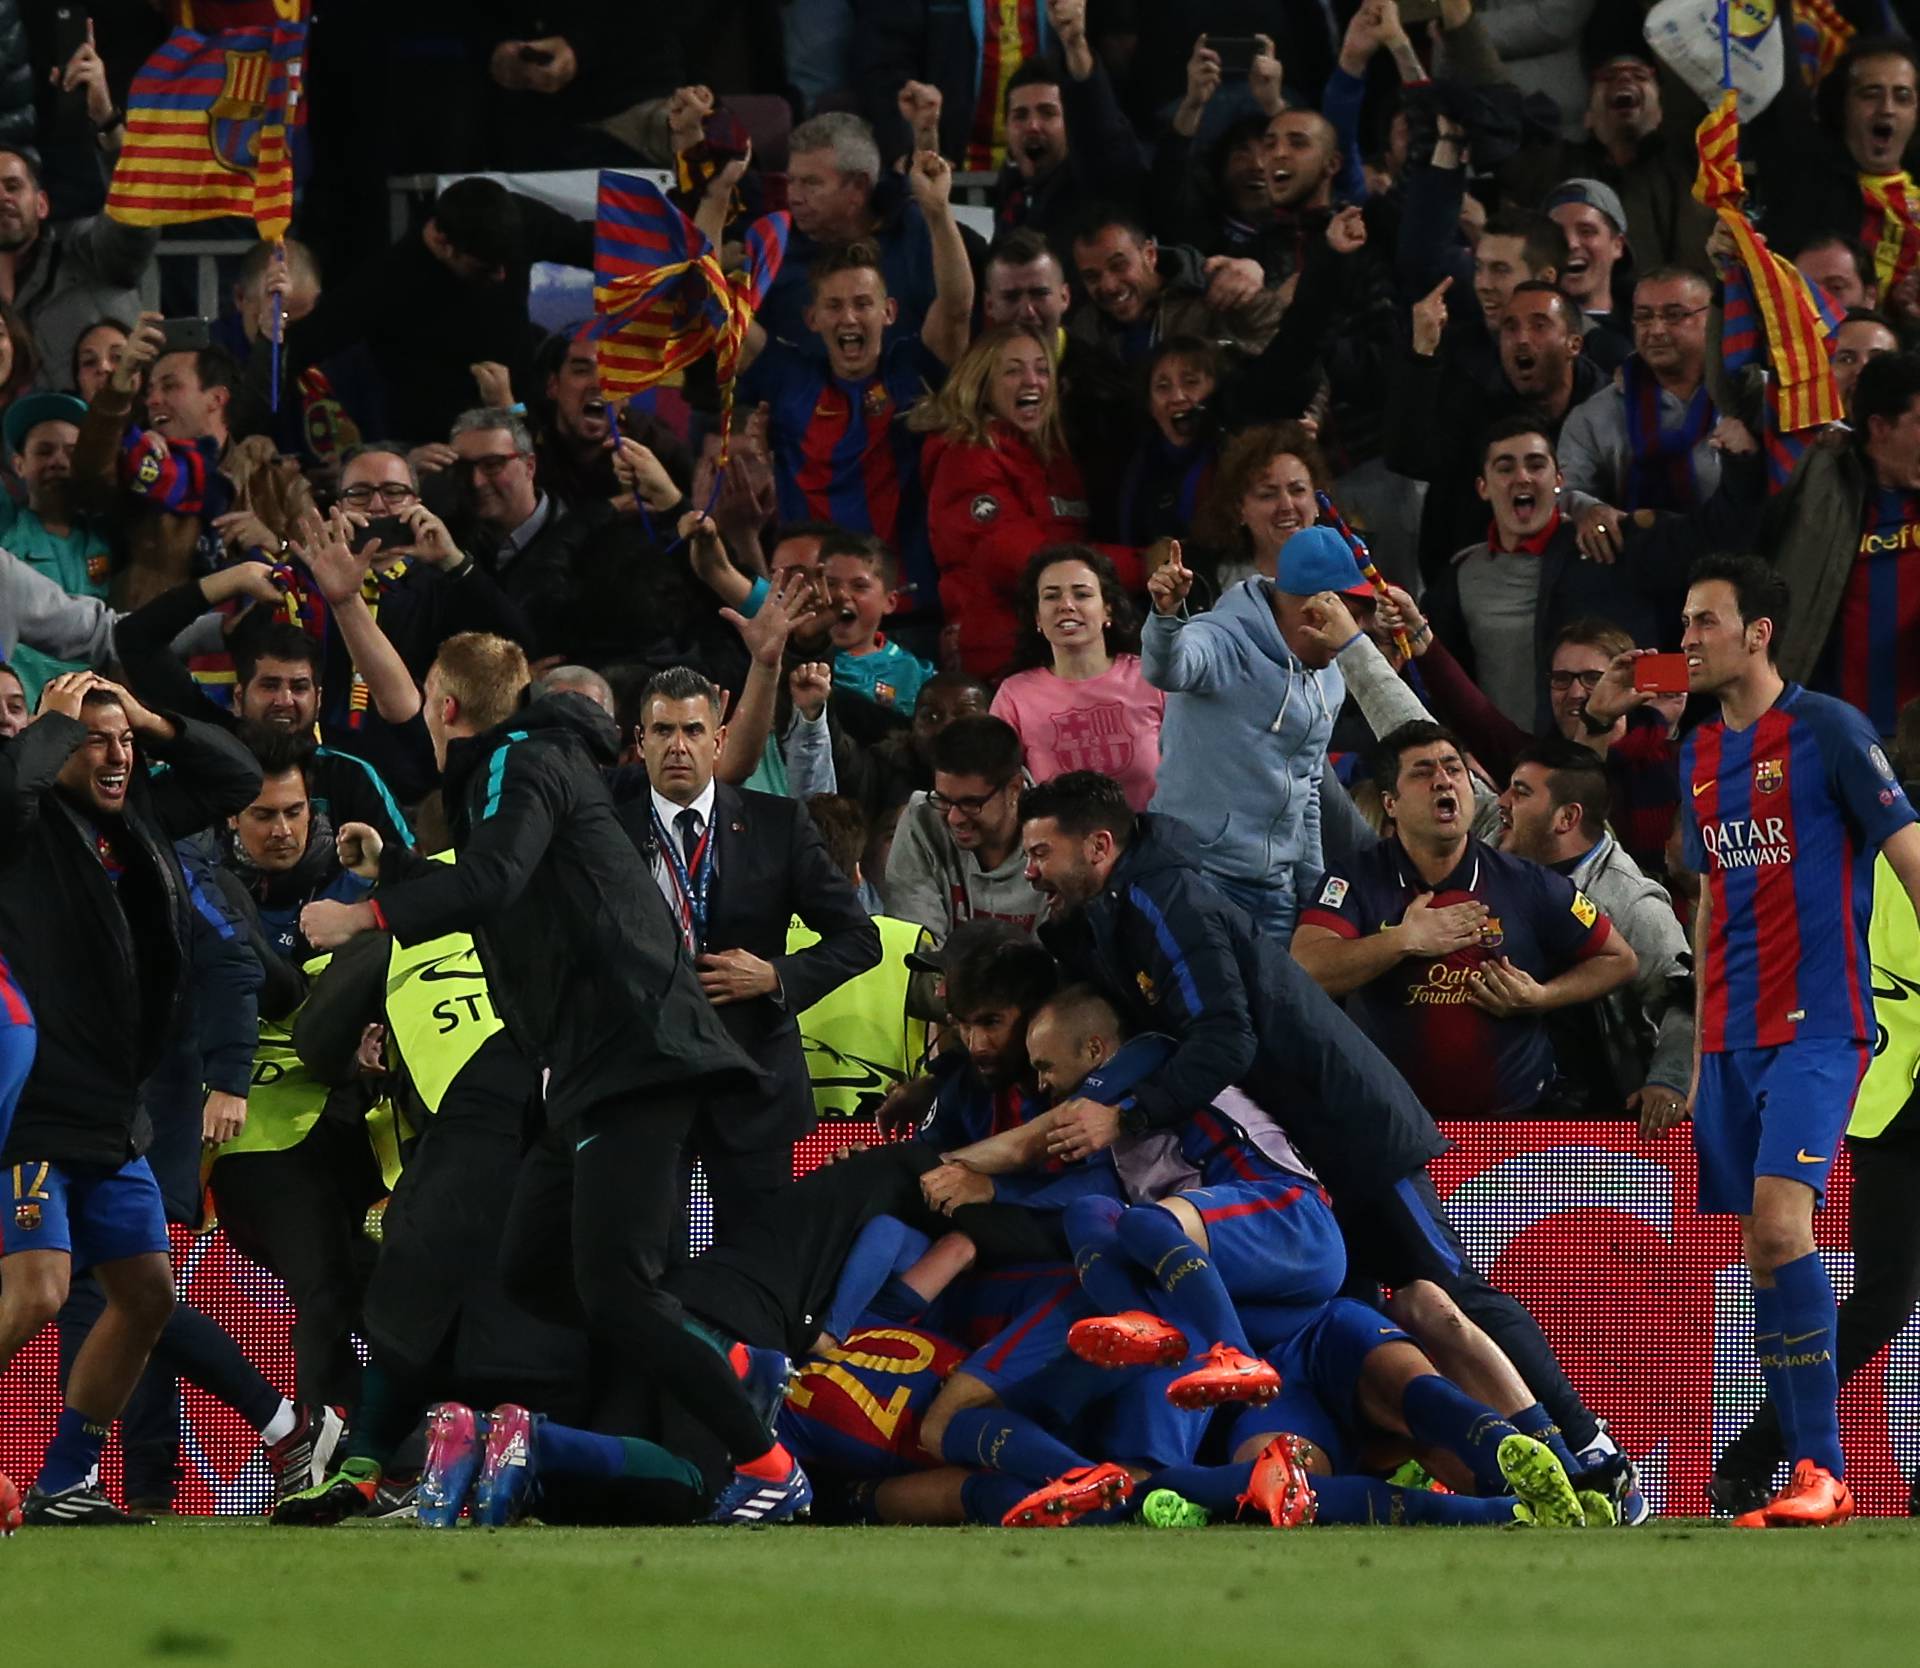 Barcelona's Sergi Roberto celebrates scoring their sixth goal with team mates and fans